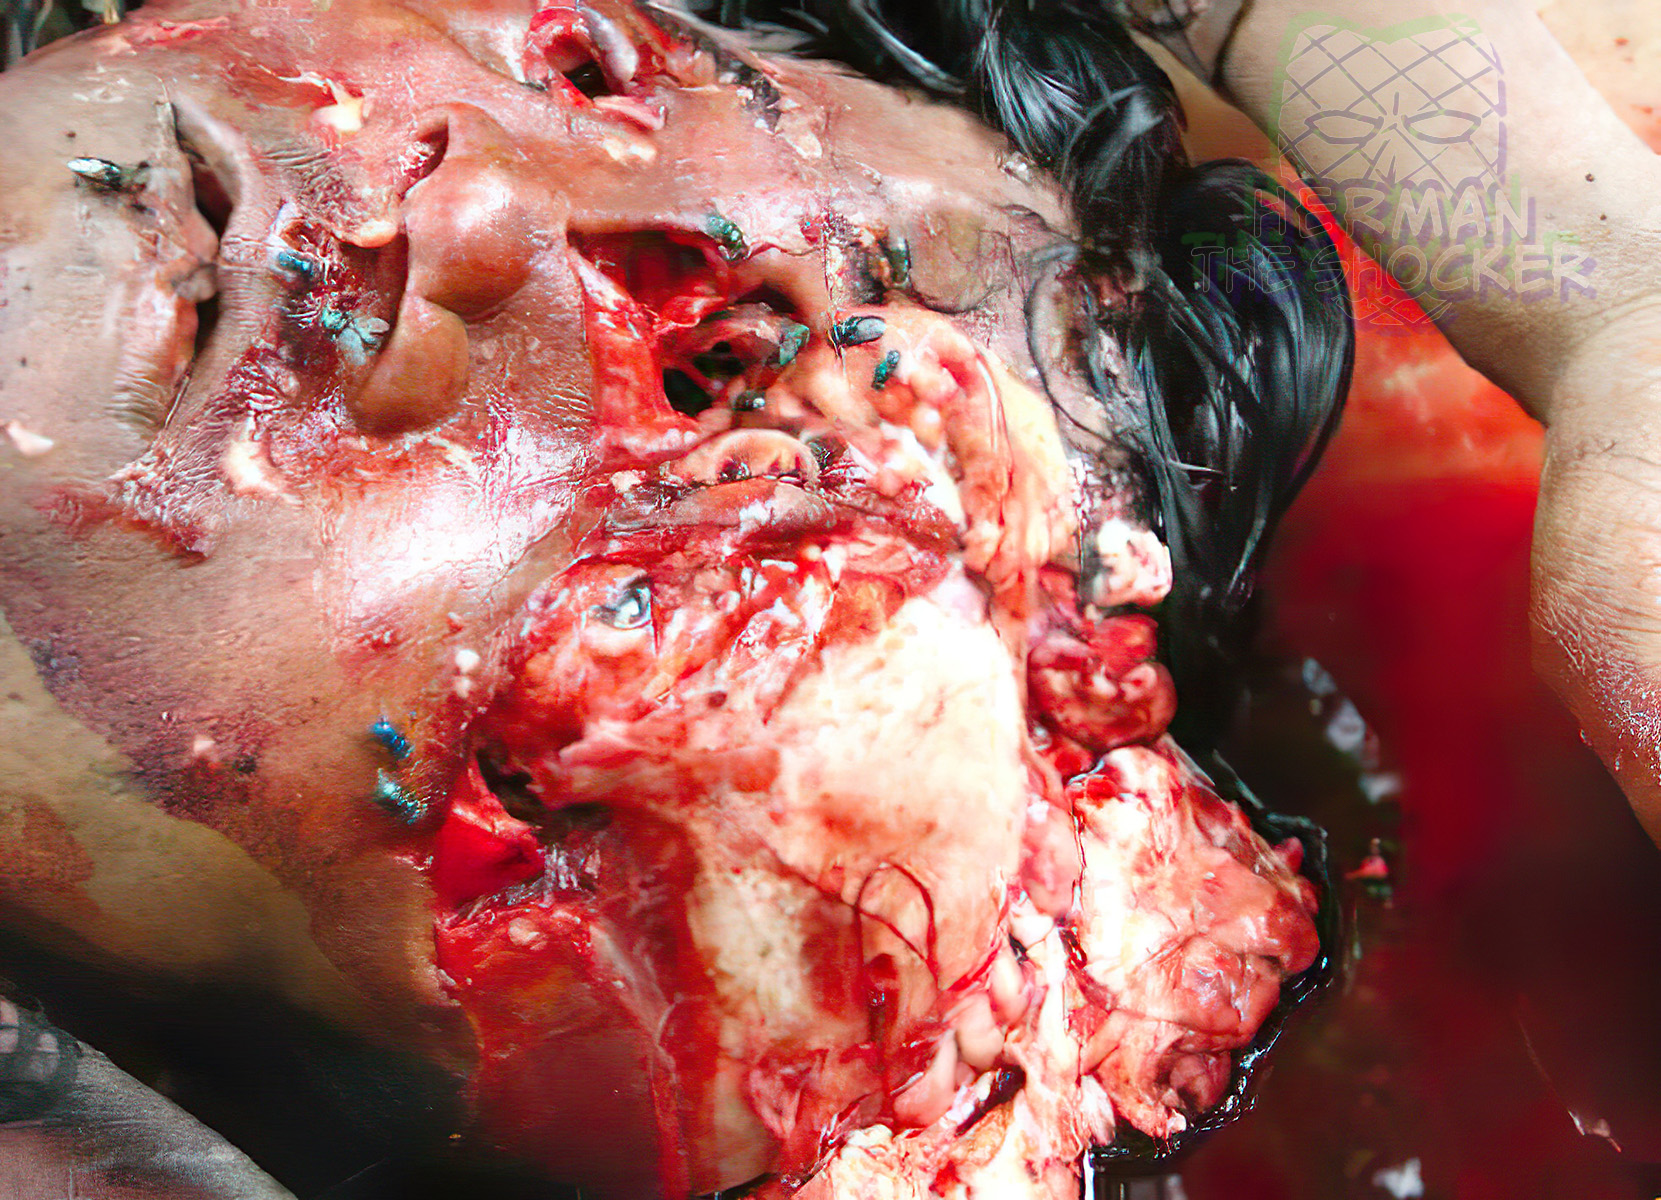 Crush laceration of the head